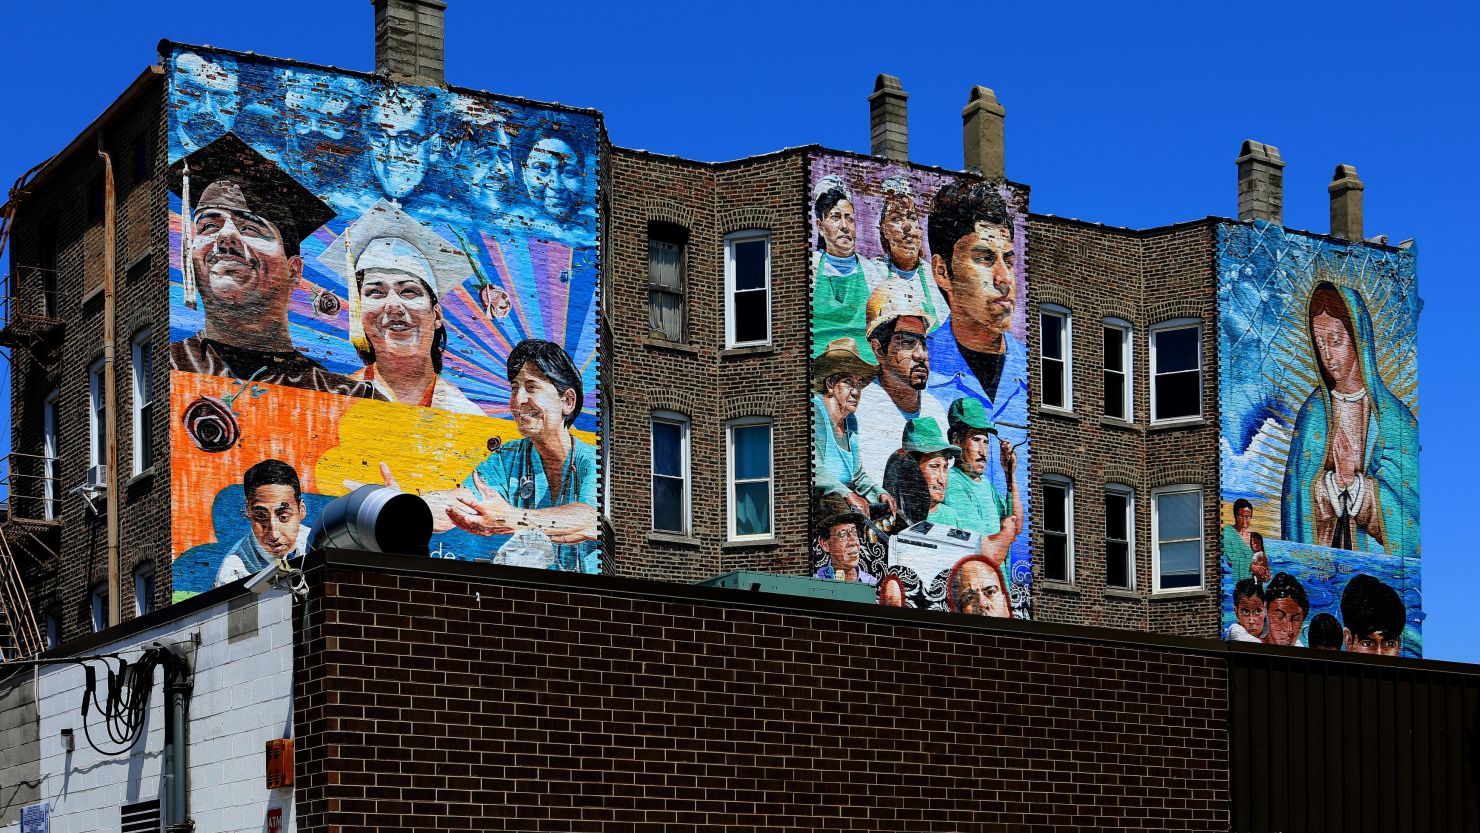 Jeff Zimmerman's 'Increibles Las Cosas A Se Ven' mural is displayed in the Pilsen neighborhood in Chicago, Illinois on June 7, 2019. (Photo By Raymond Boyd/Getty Images)